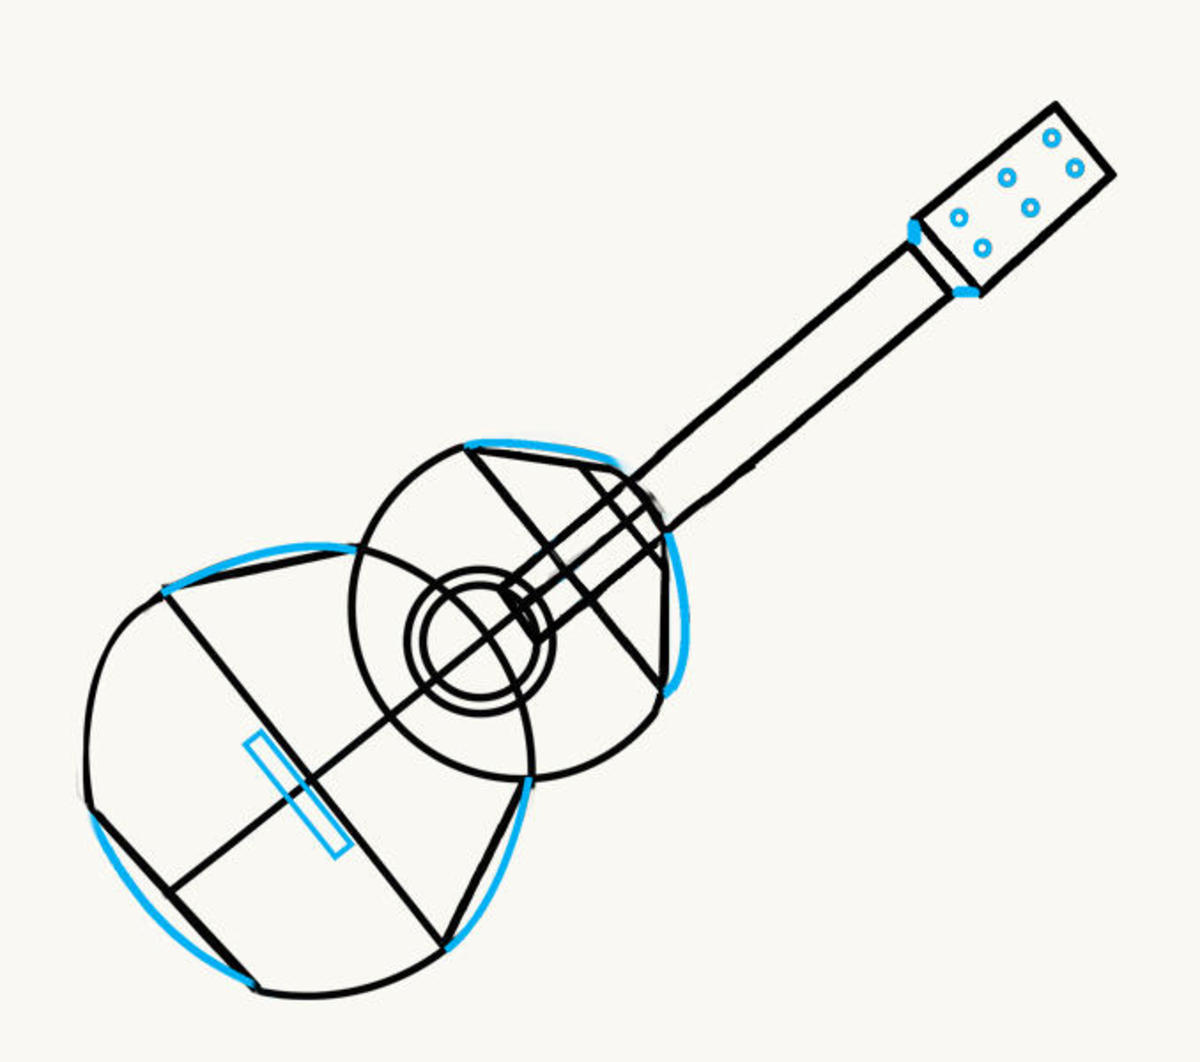 step-by-step-drawing-of-a-guitar